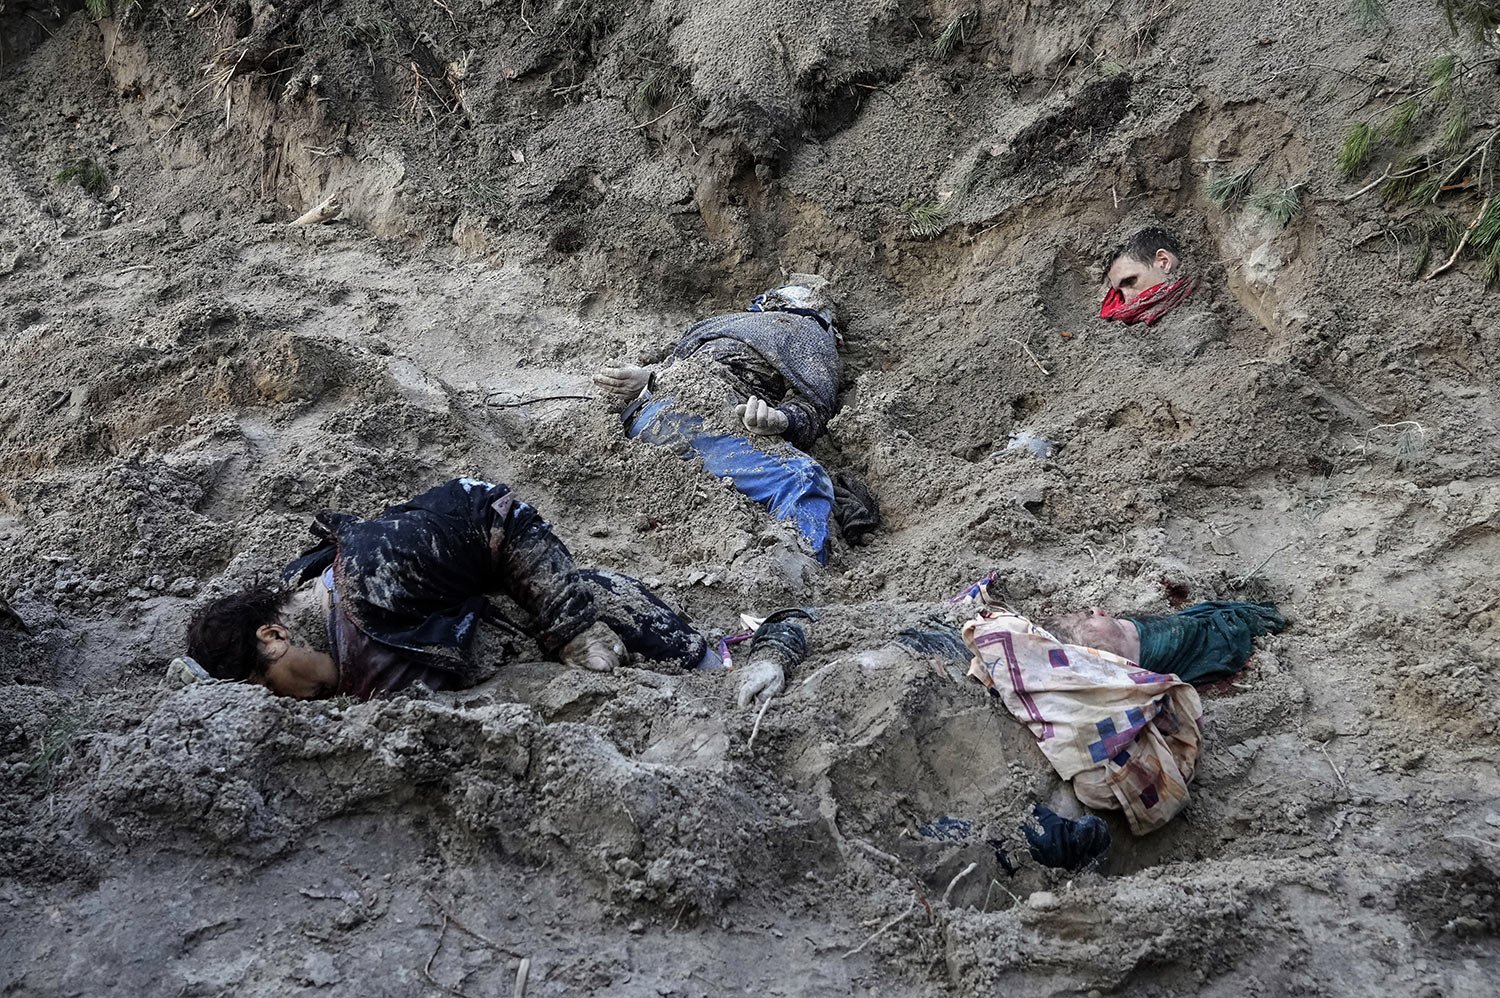  GRAPHIC CONTENT - Four bodies lie in a mass grave, including the village mayor and her family, in Motyzhyn close to Kyiv, Ukraine, Monday, April 4, 2022, after Russian army were pushed out from the area by Ukrainian forces. The bodies appeared to ha